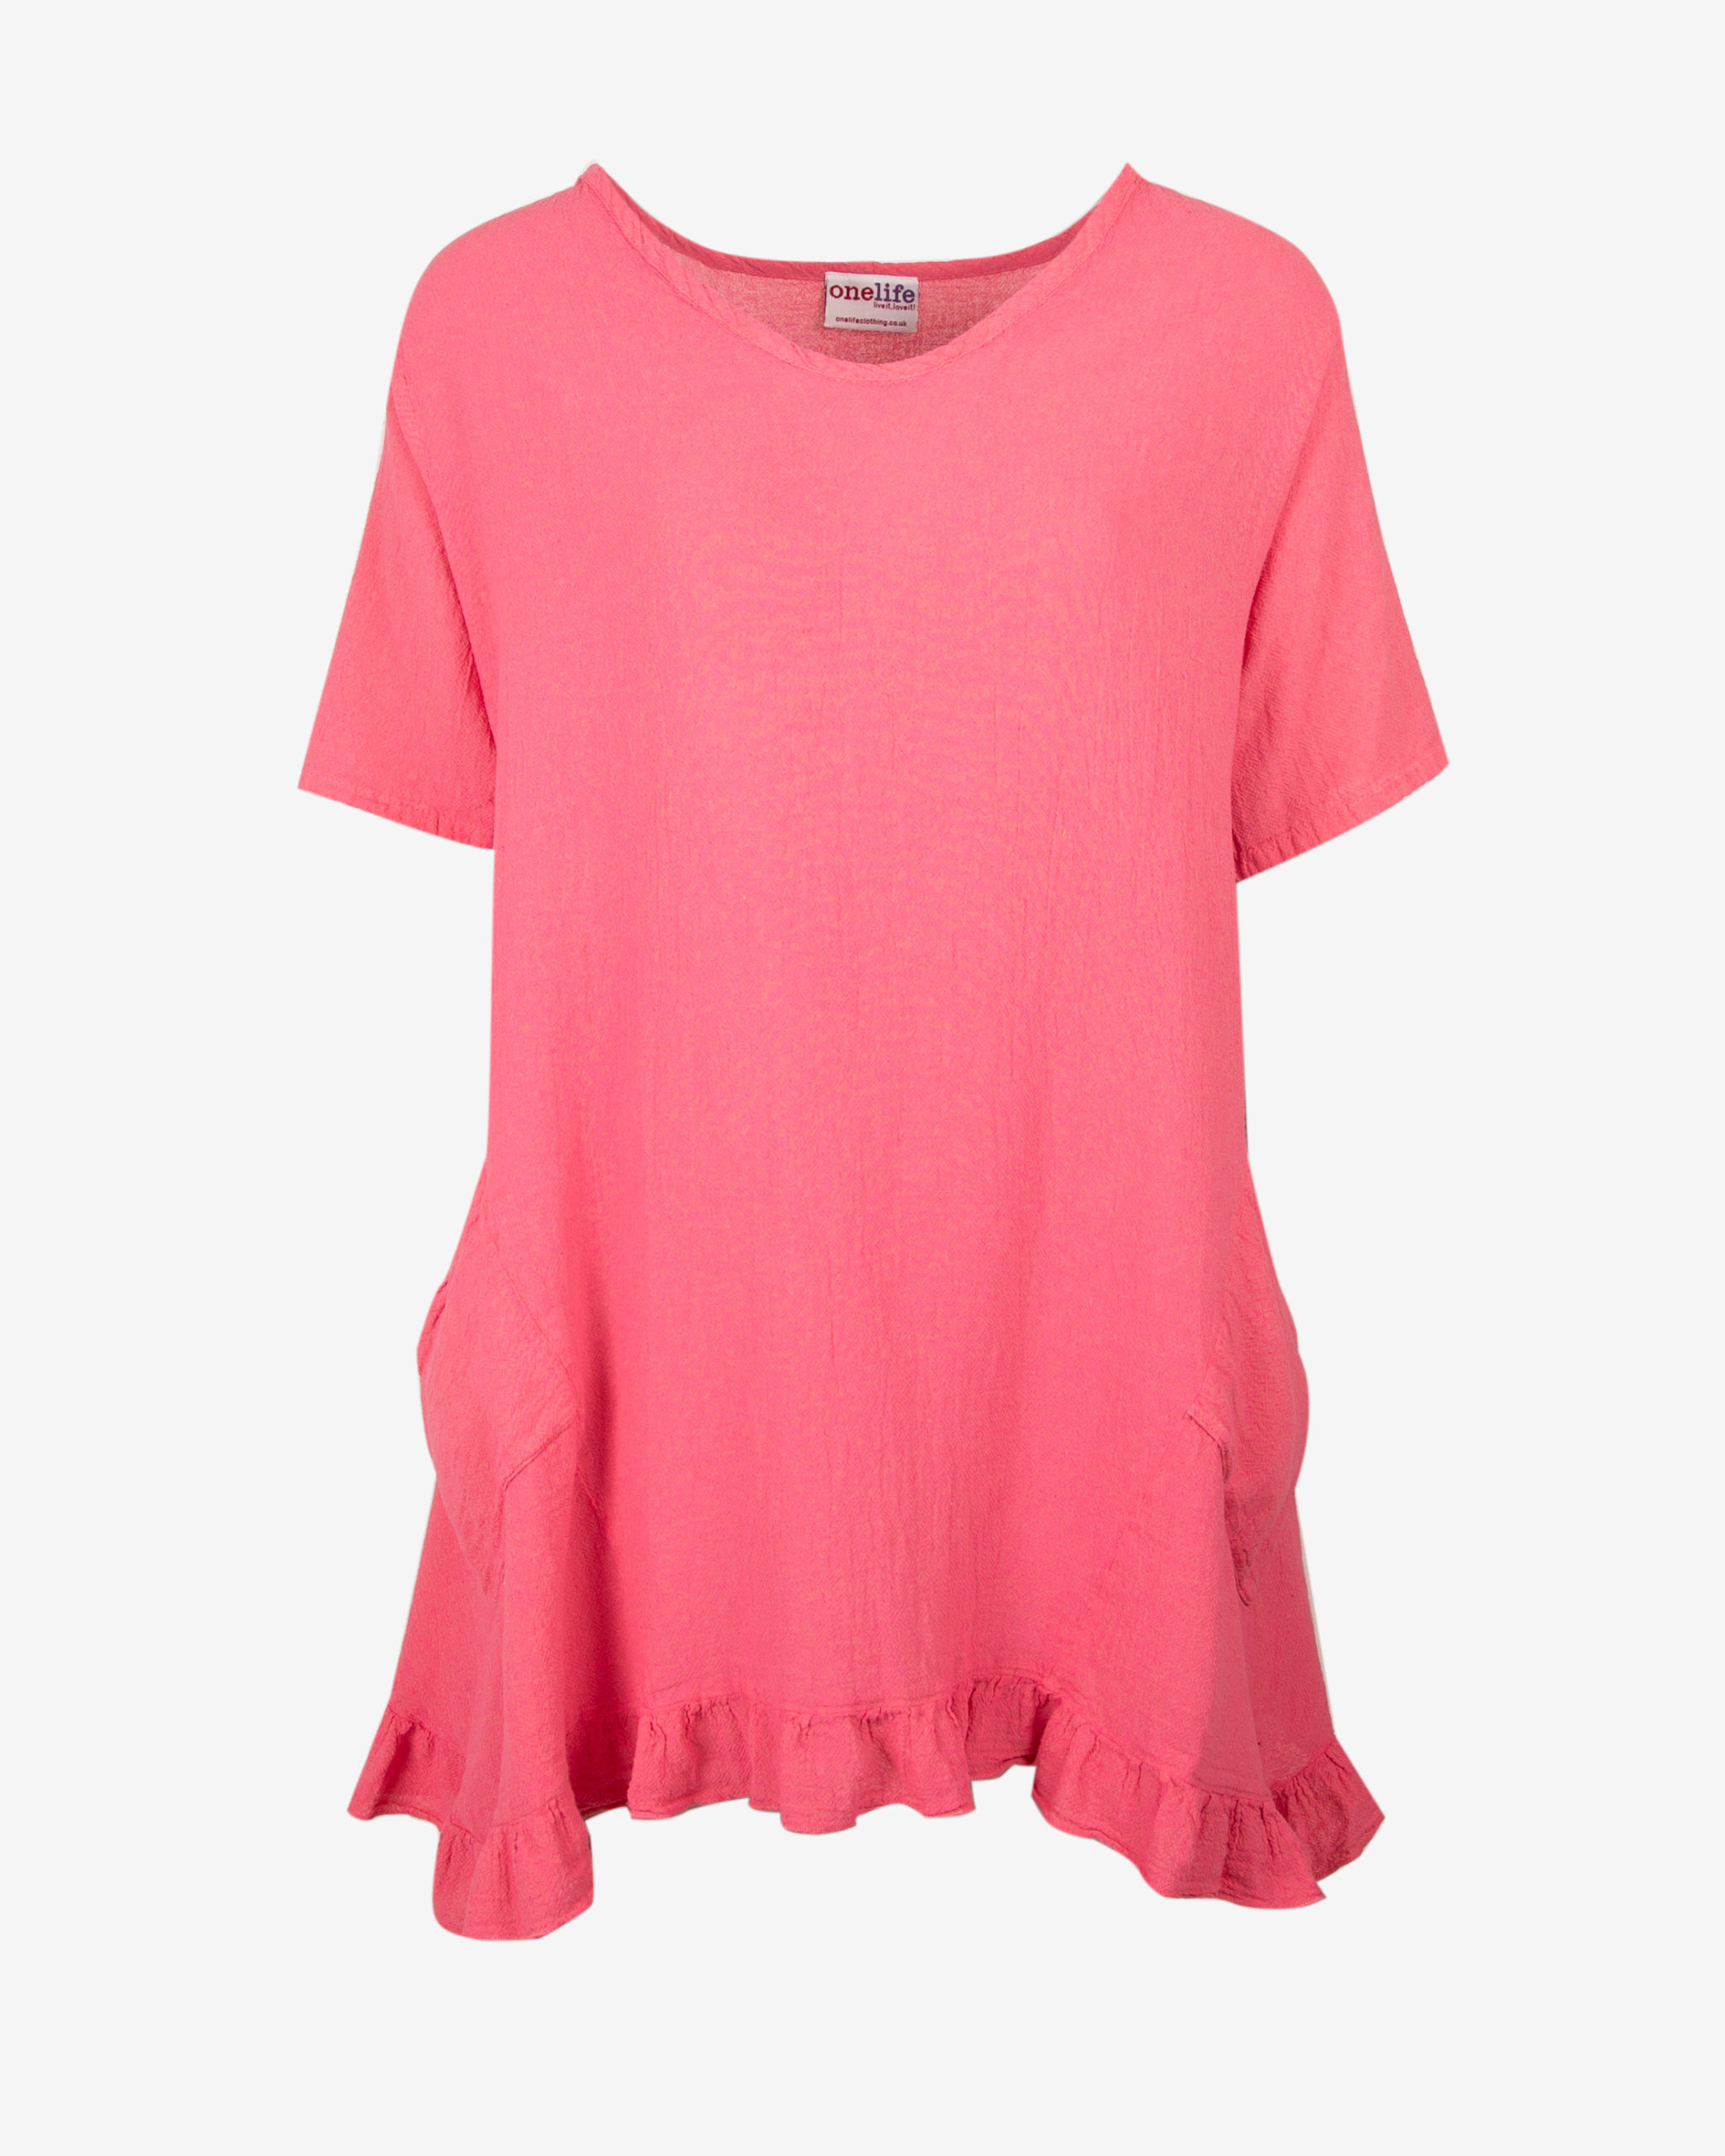 Nancy Top | 100% Cotton Clothing | One Life Clothing